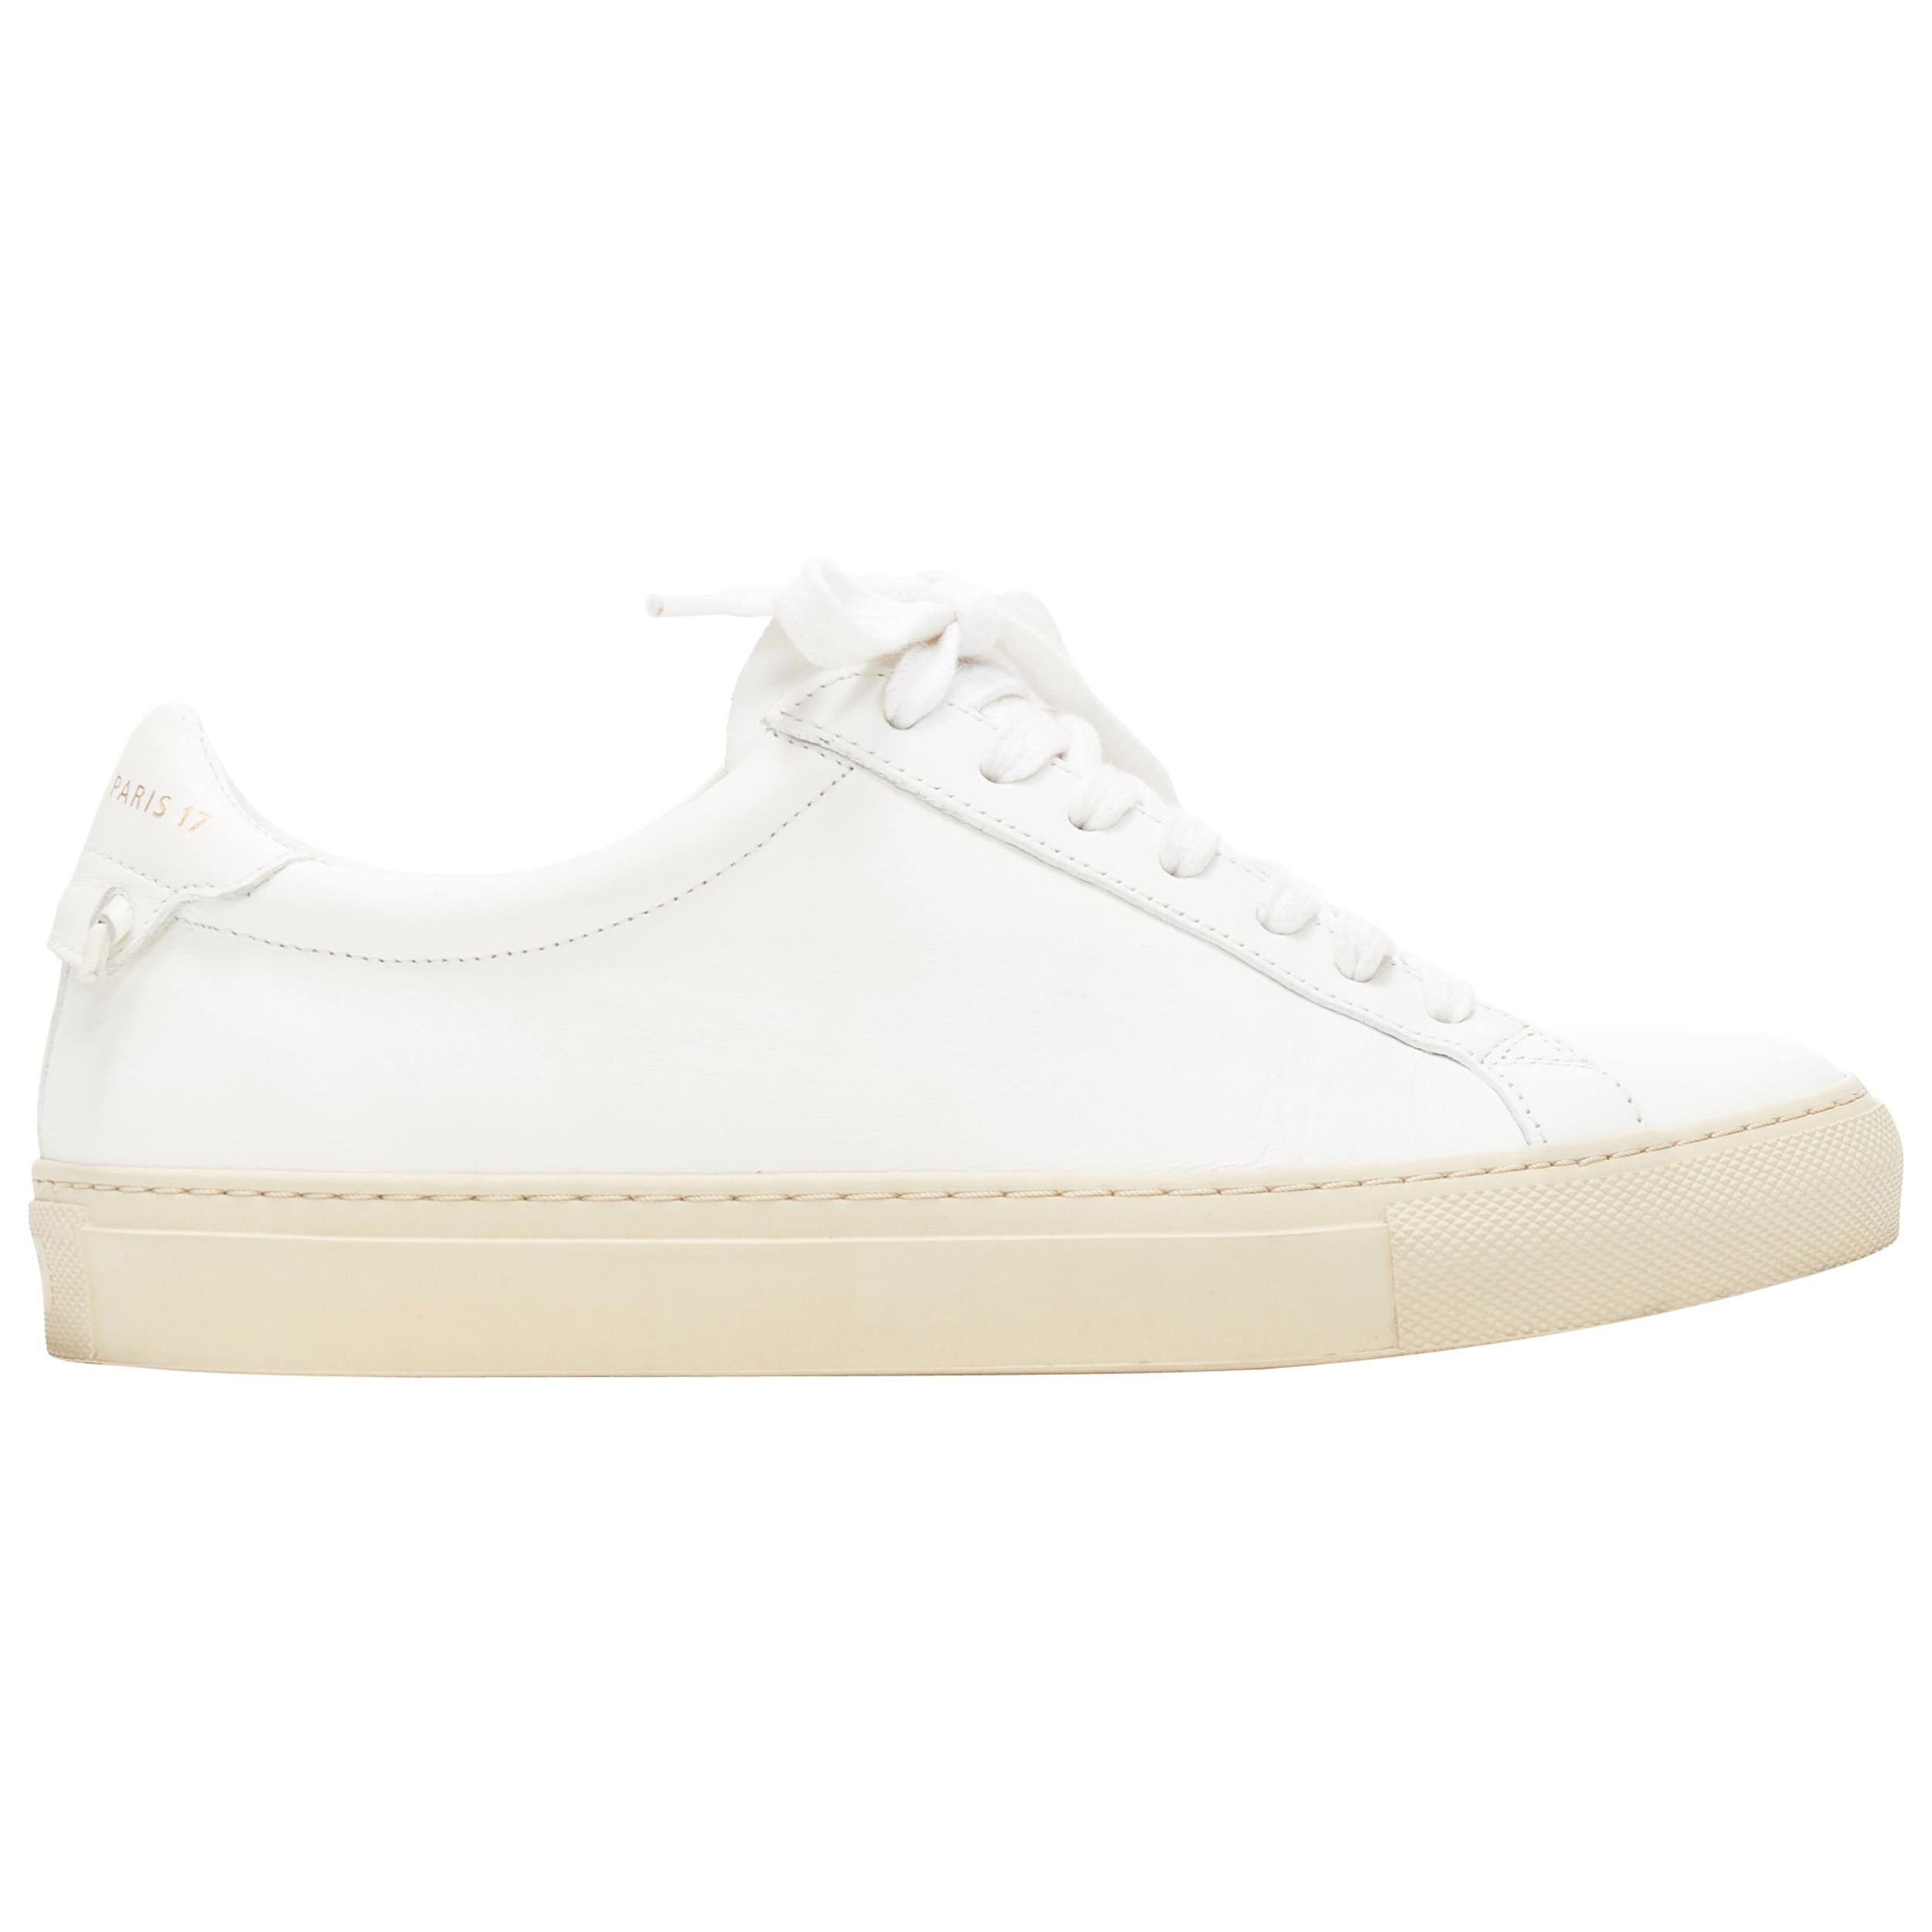 GIVENCHY Paris 17 white leather lace up minimalist low top sneakers EU37.5